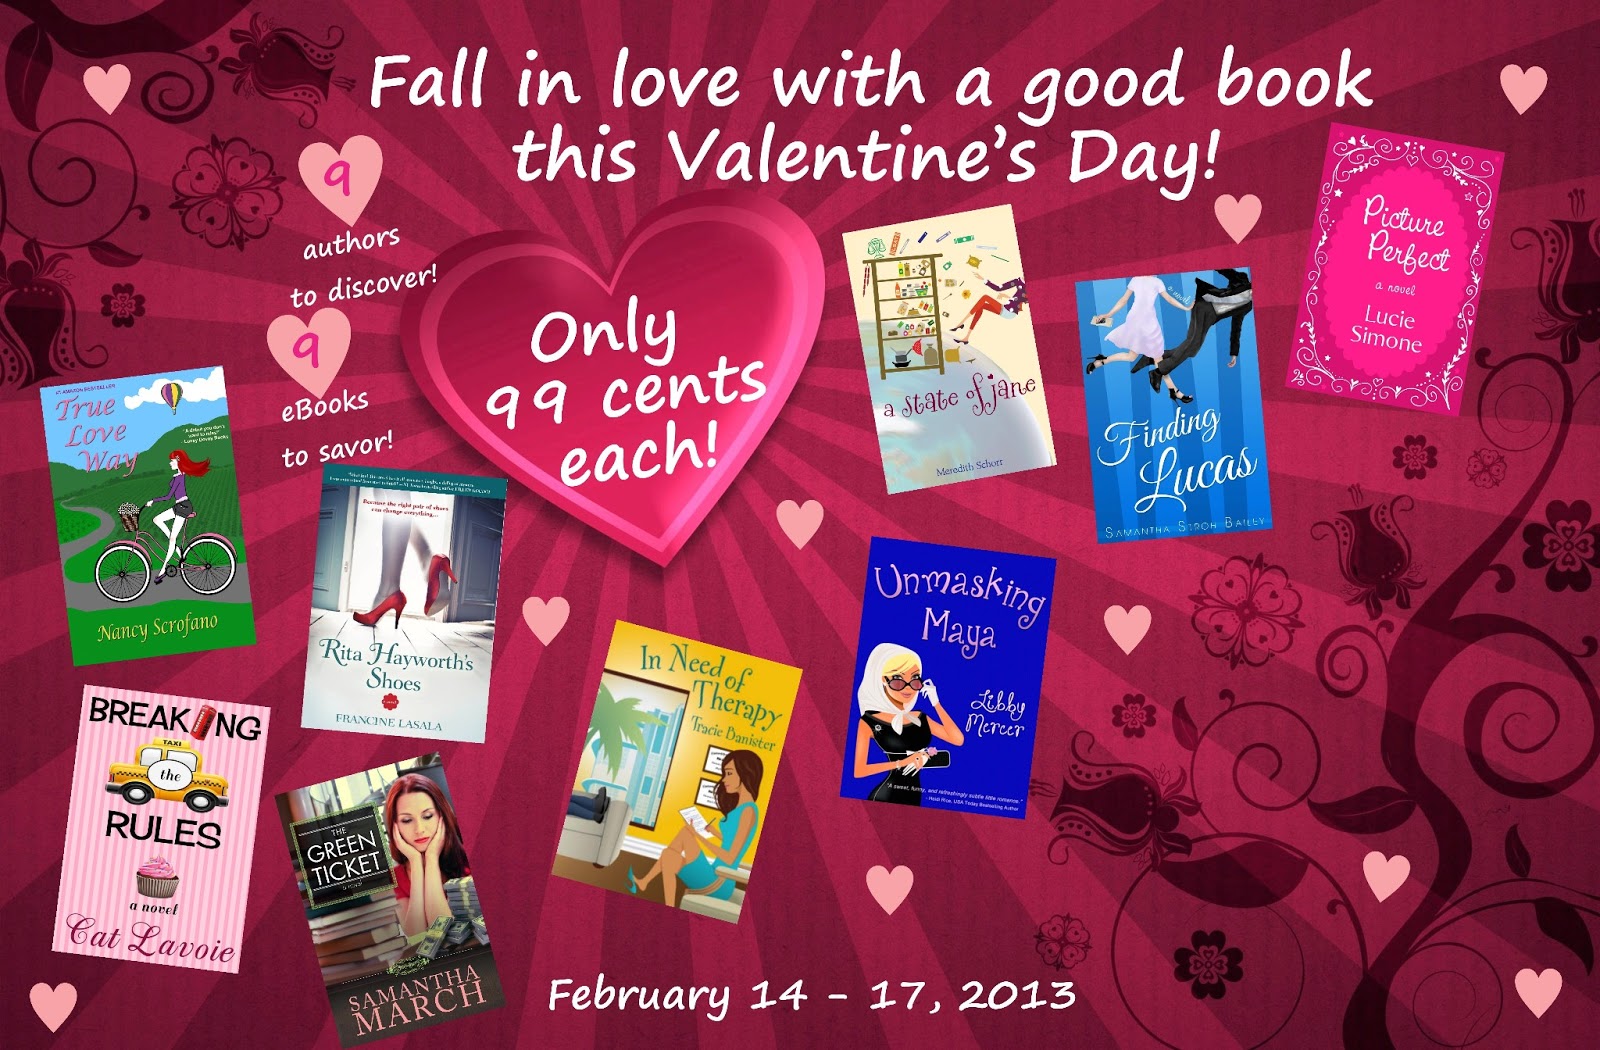 14 Valentine's Day Romance Books To Fall In Love With